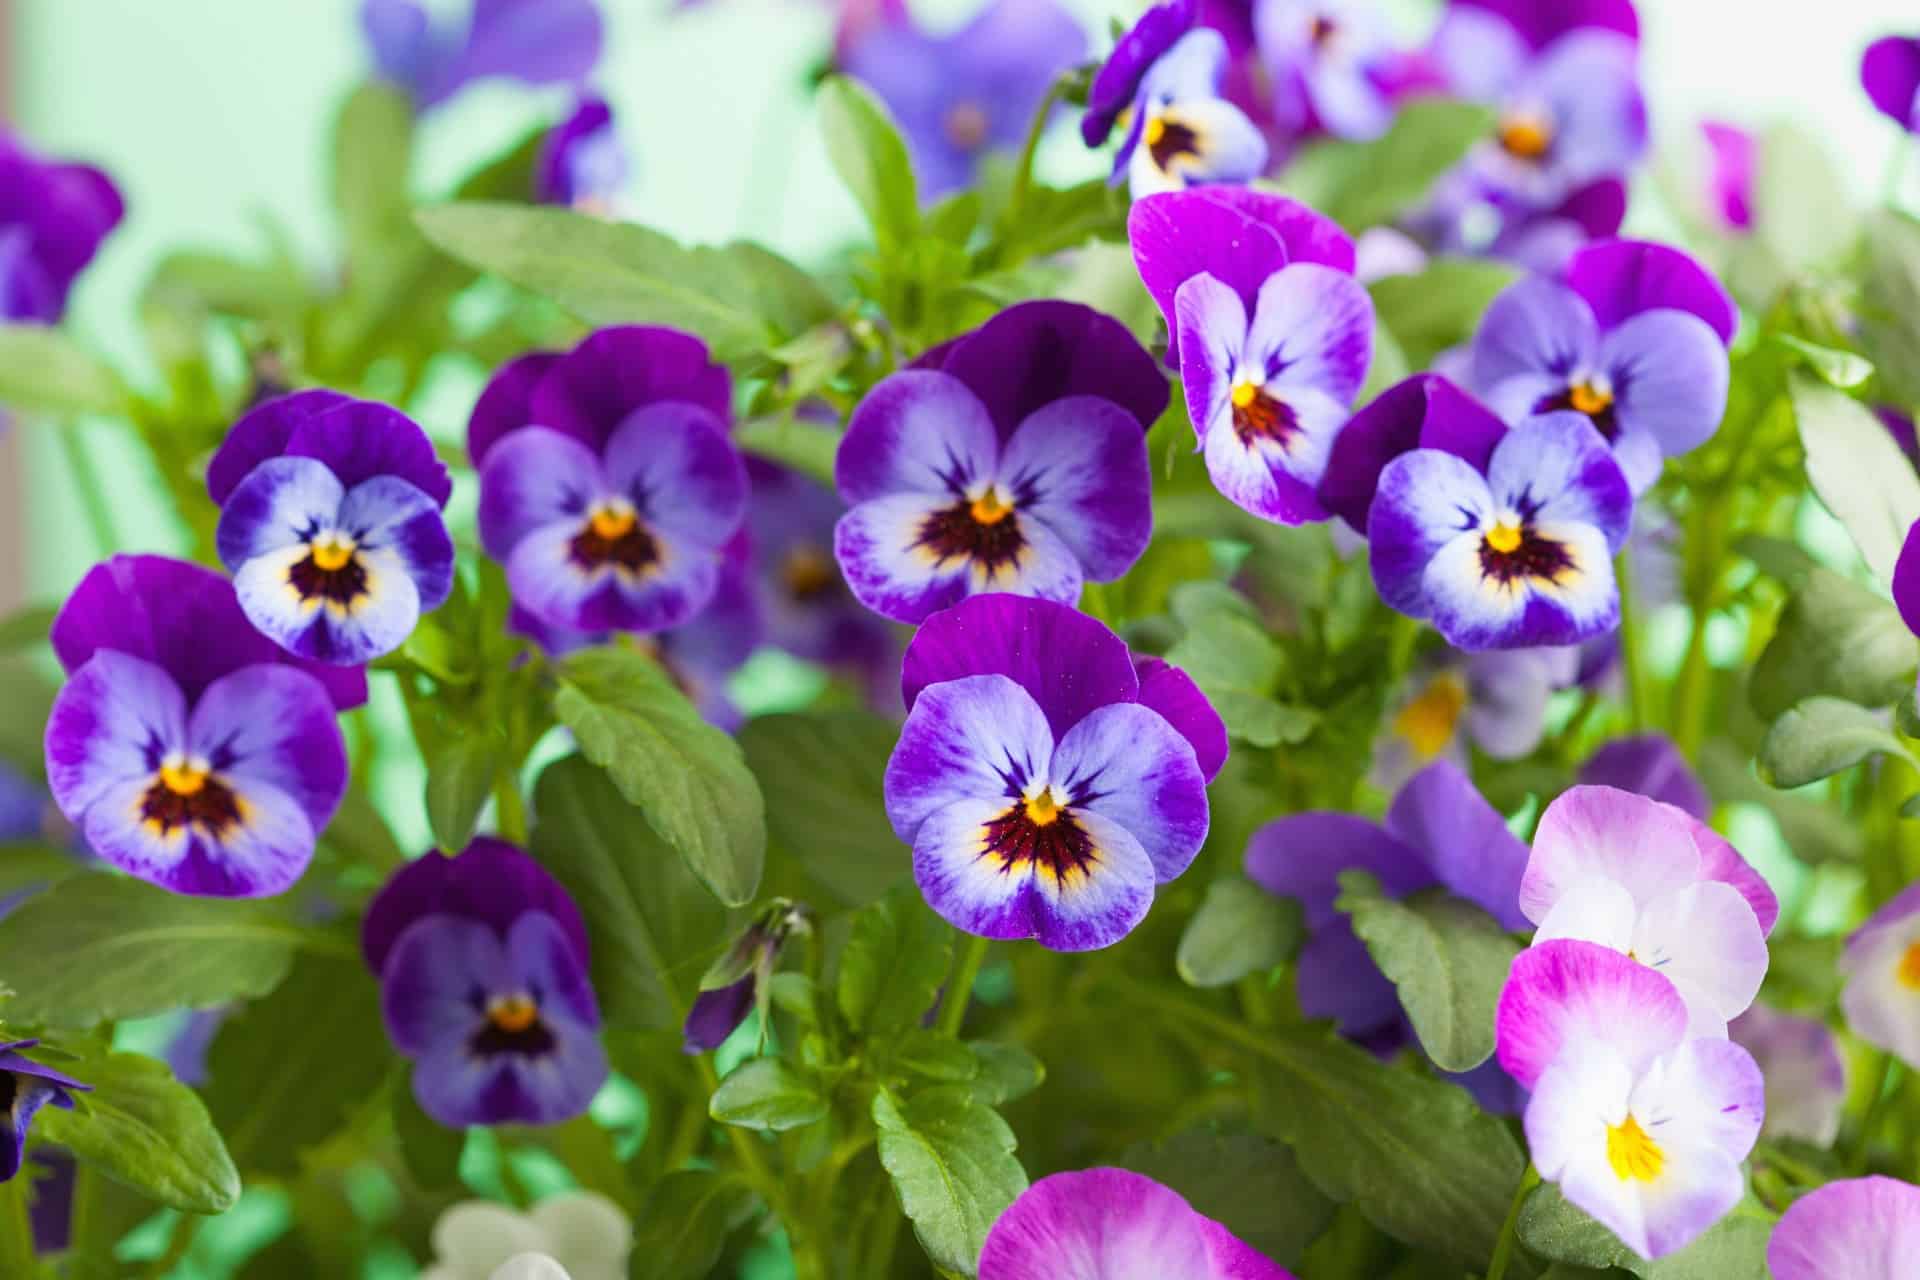 Pansies are cheerful flowers that are also edible.